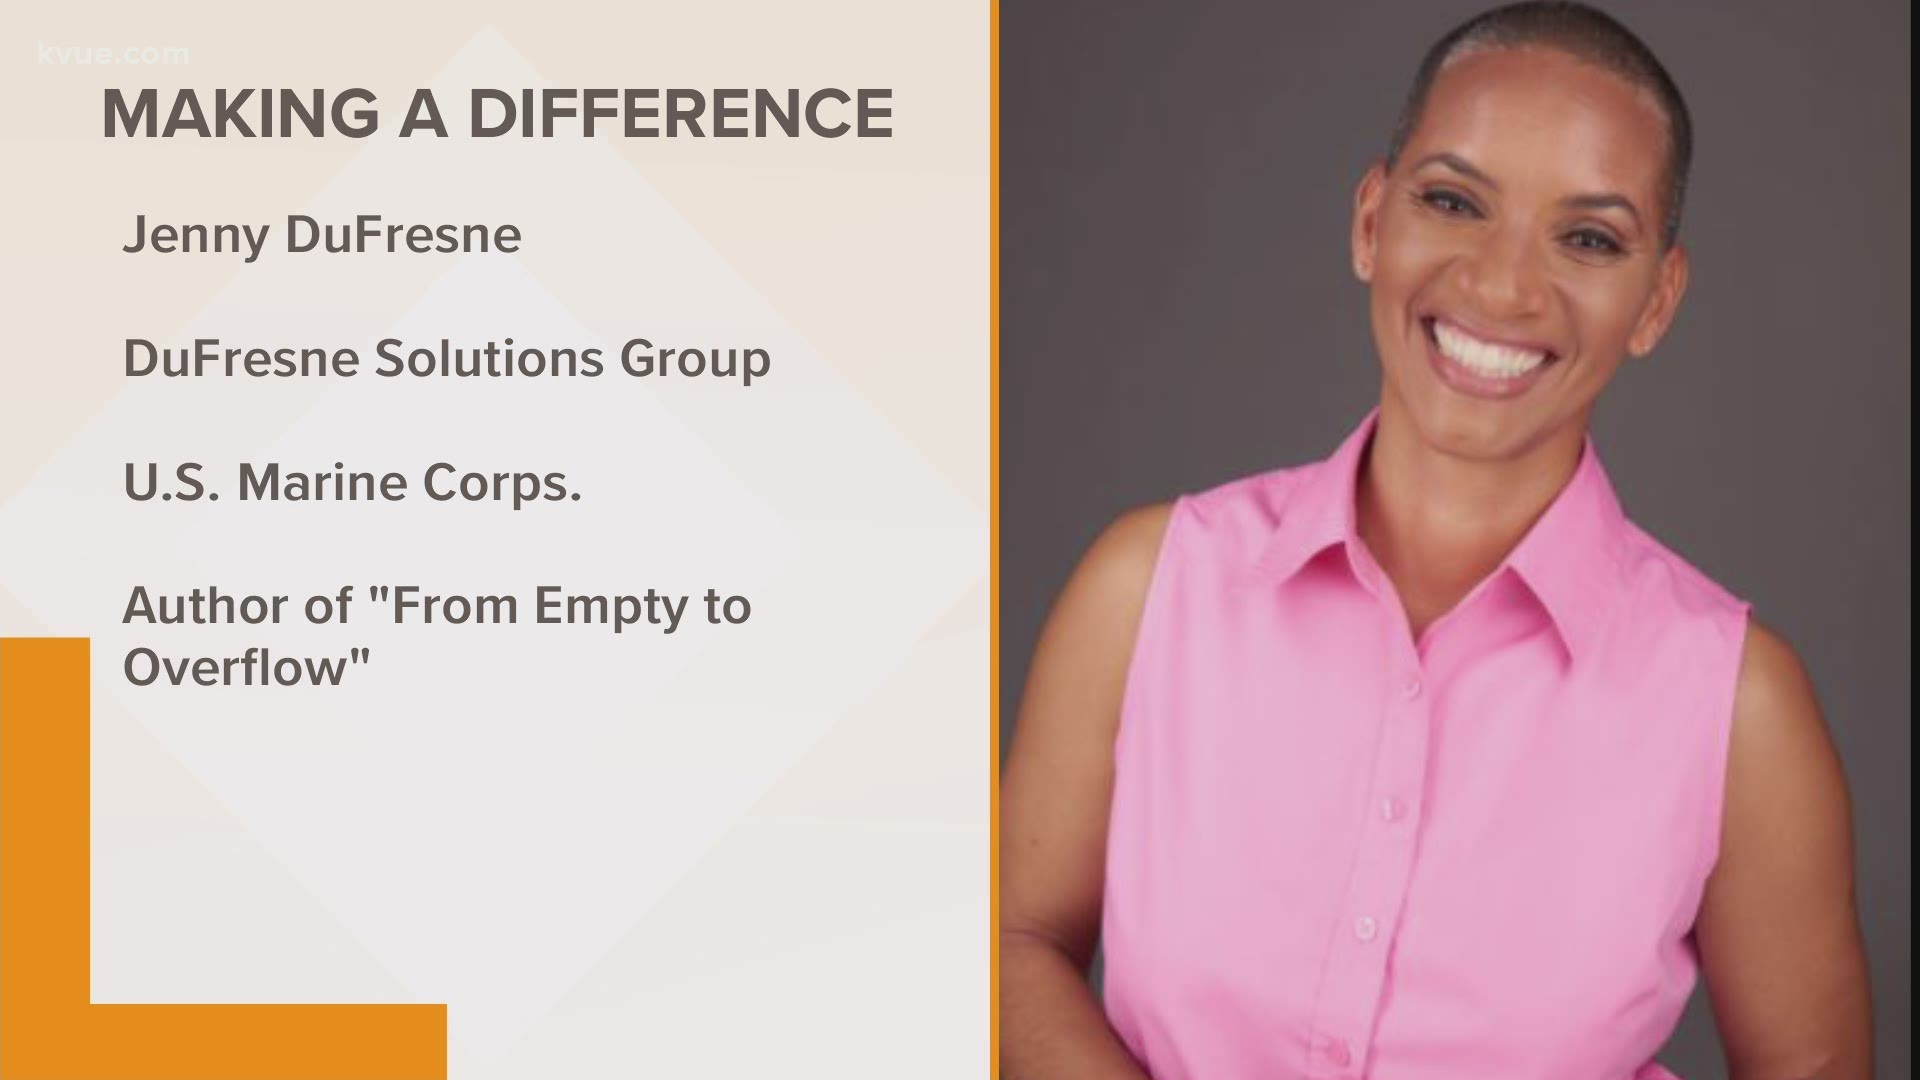 Jenny DuFresne is the CEO of DuFresne Solutions Group, a leadership training firm. She is the Board Chair for the Greater Austin Black Chamber of Commerce.